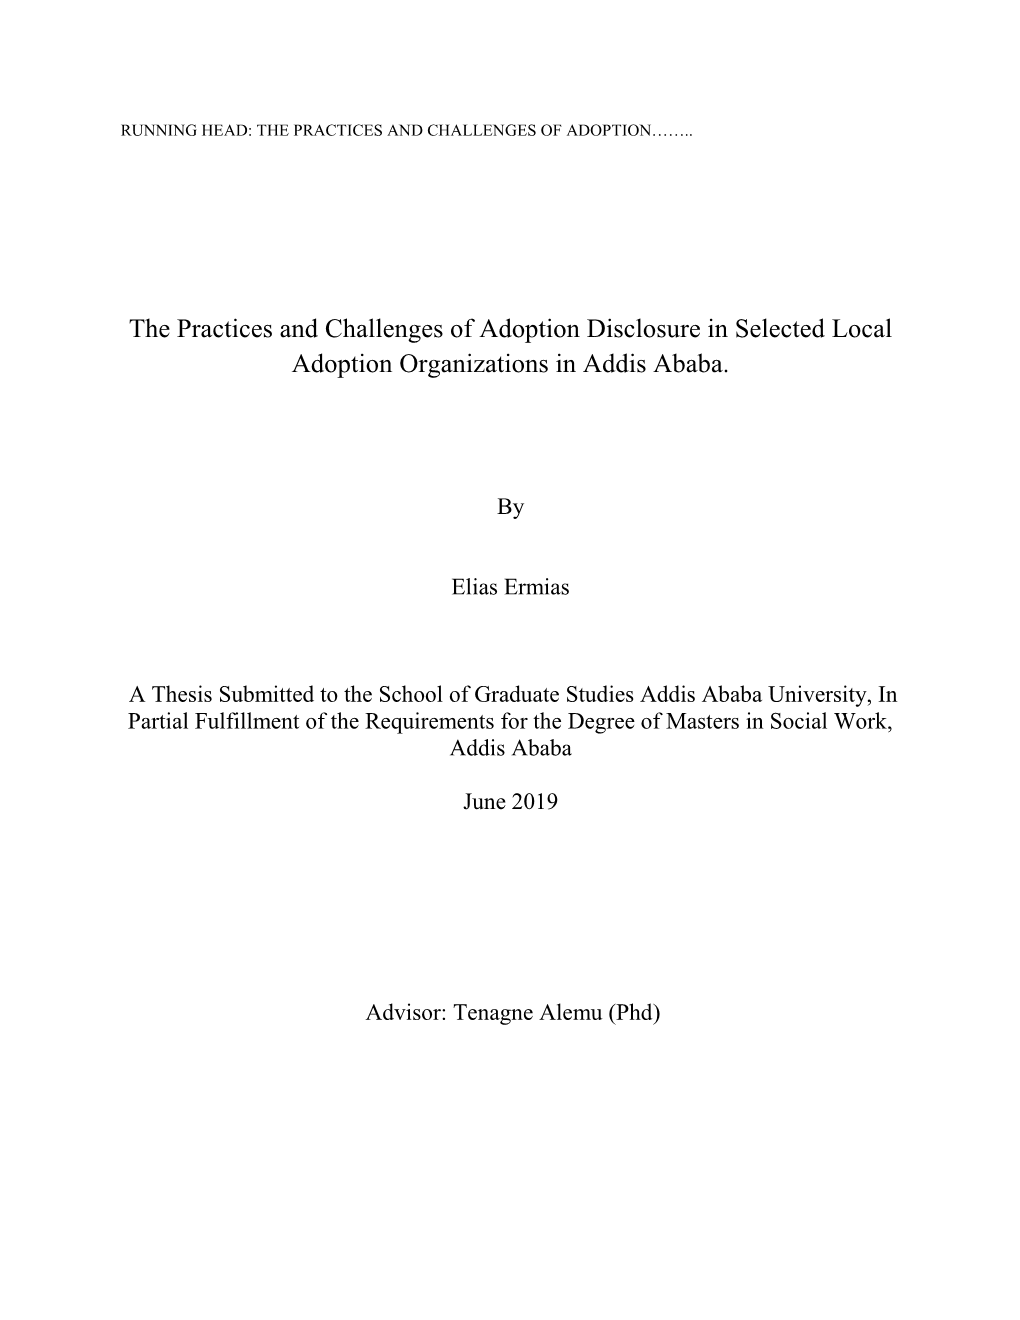 The Practices and Challenges of Adoption Disclosure in Selected Local Adoption Organizations in Addis Ababa